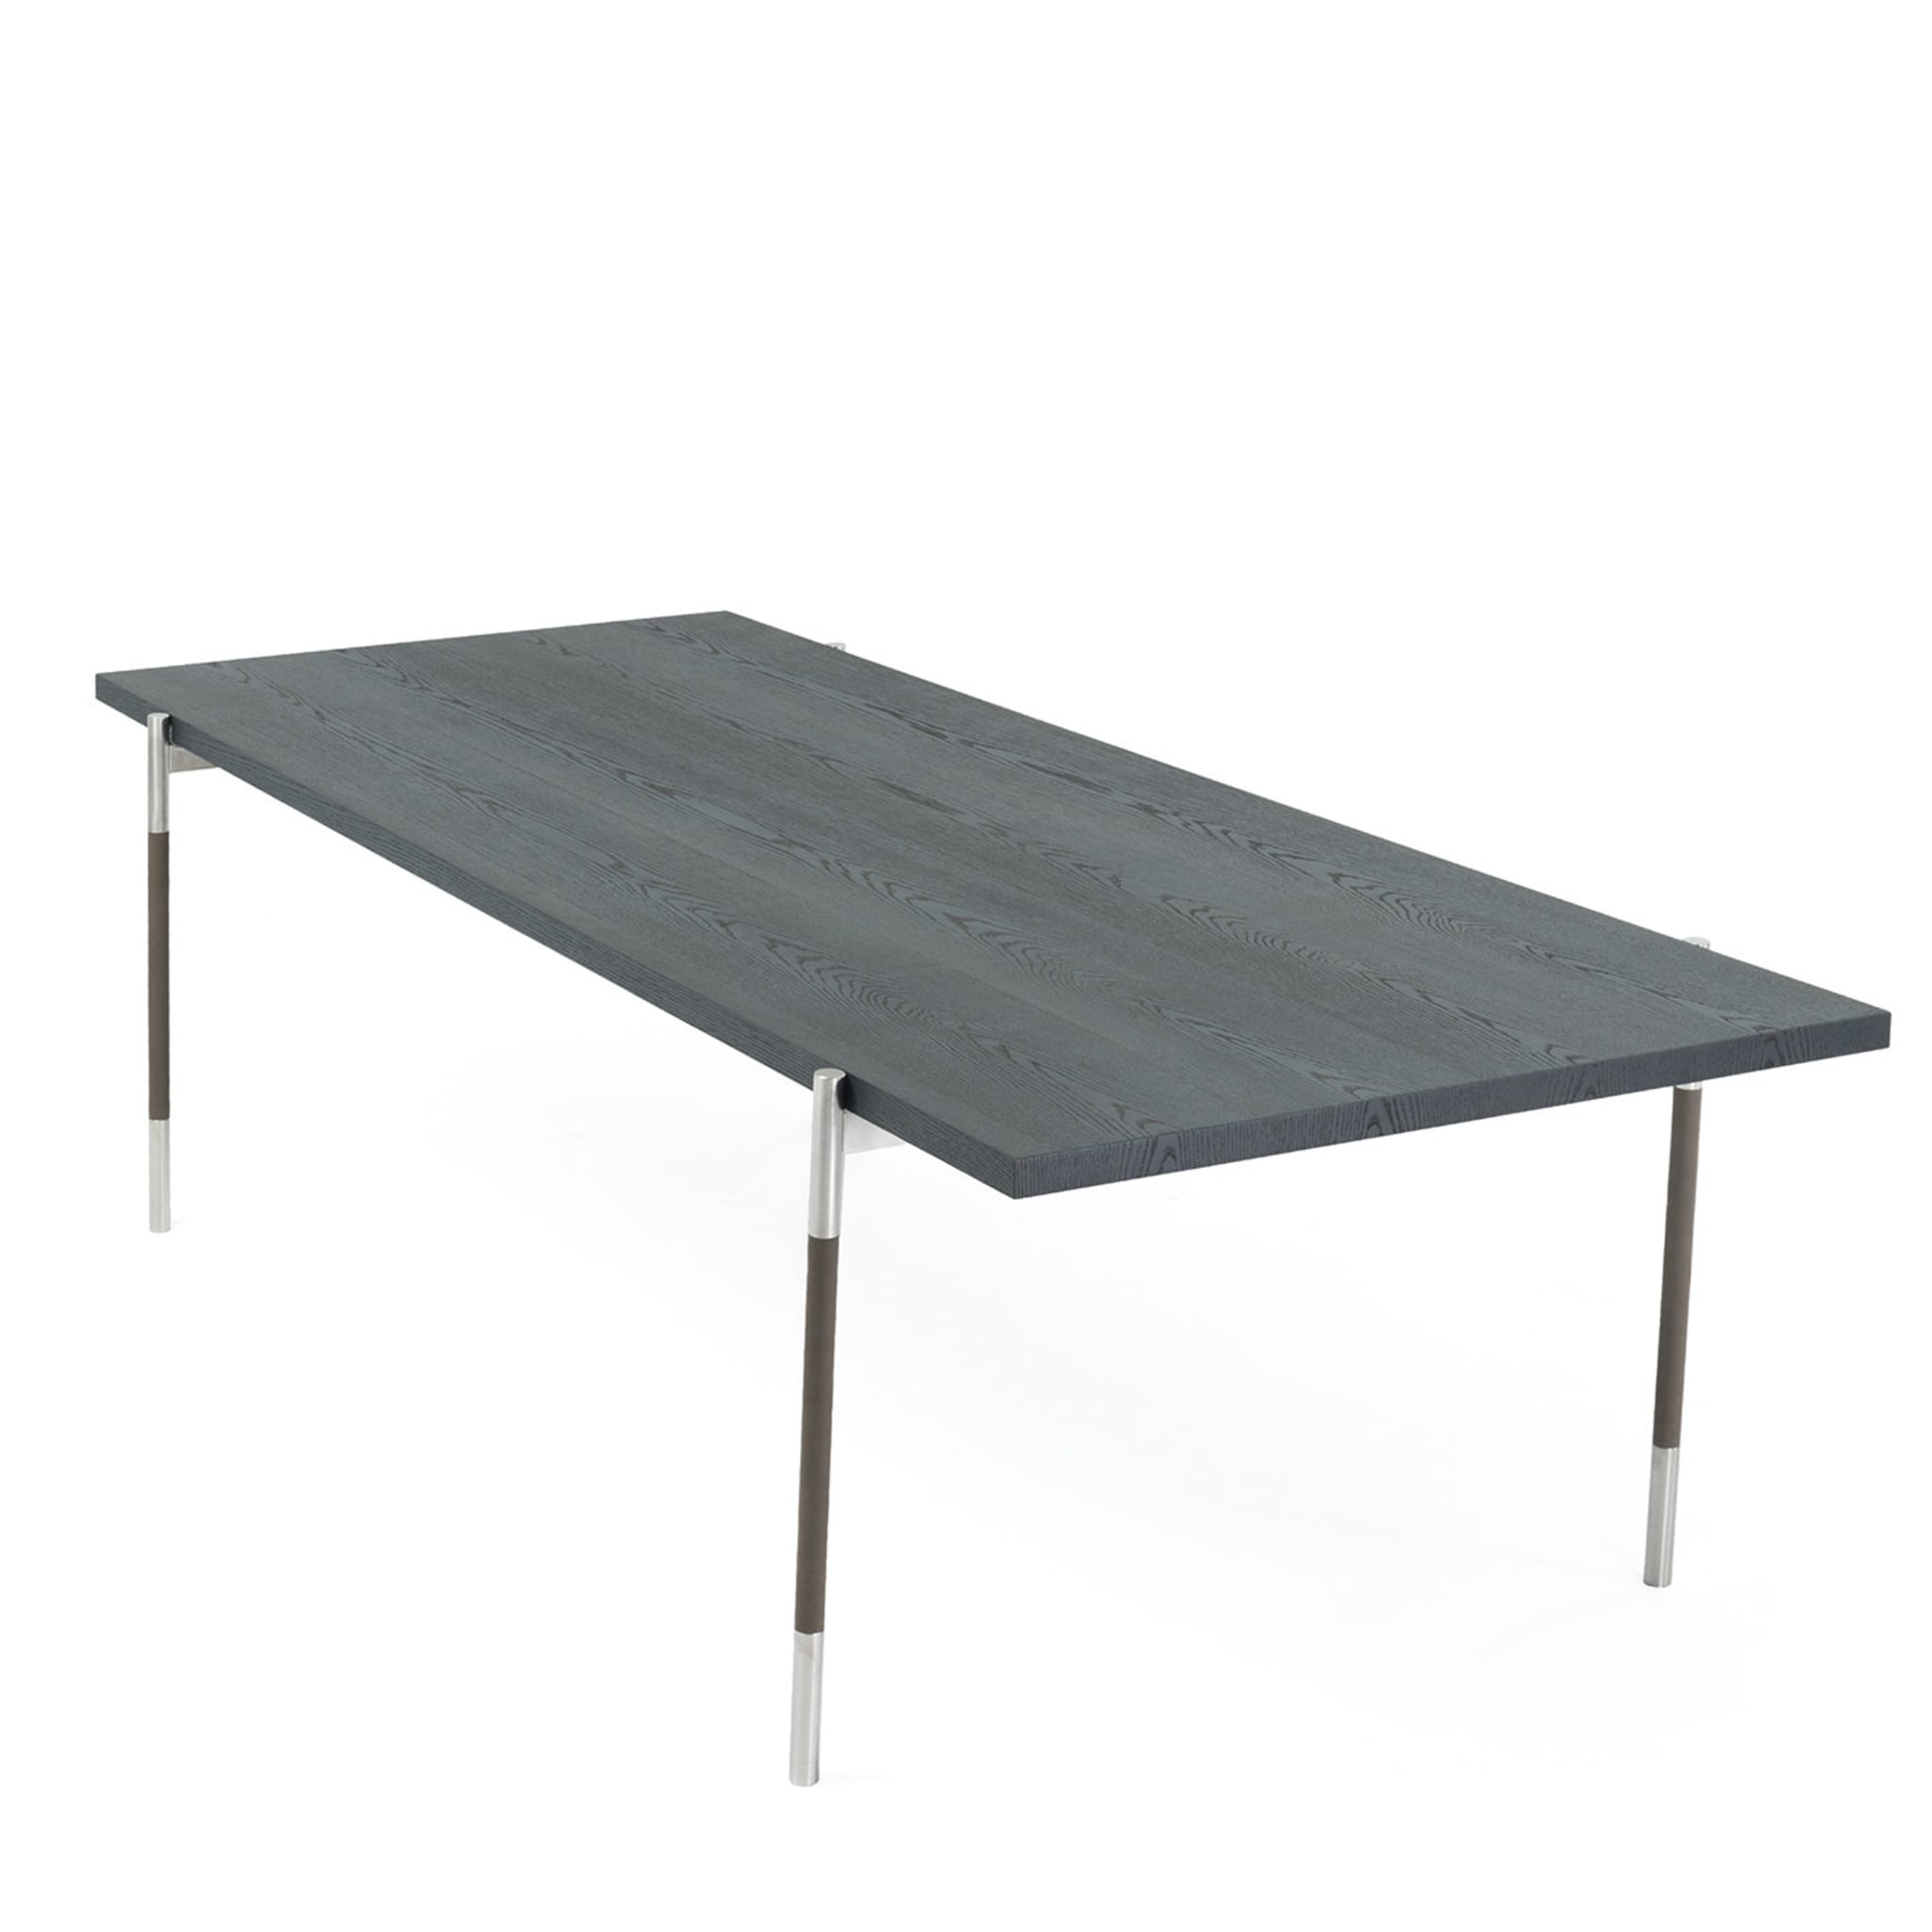 Respiro Table with Oak Top by Michael Schoeller - Alternative view 1